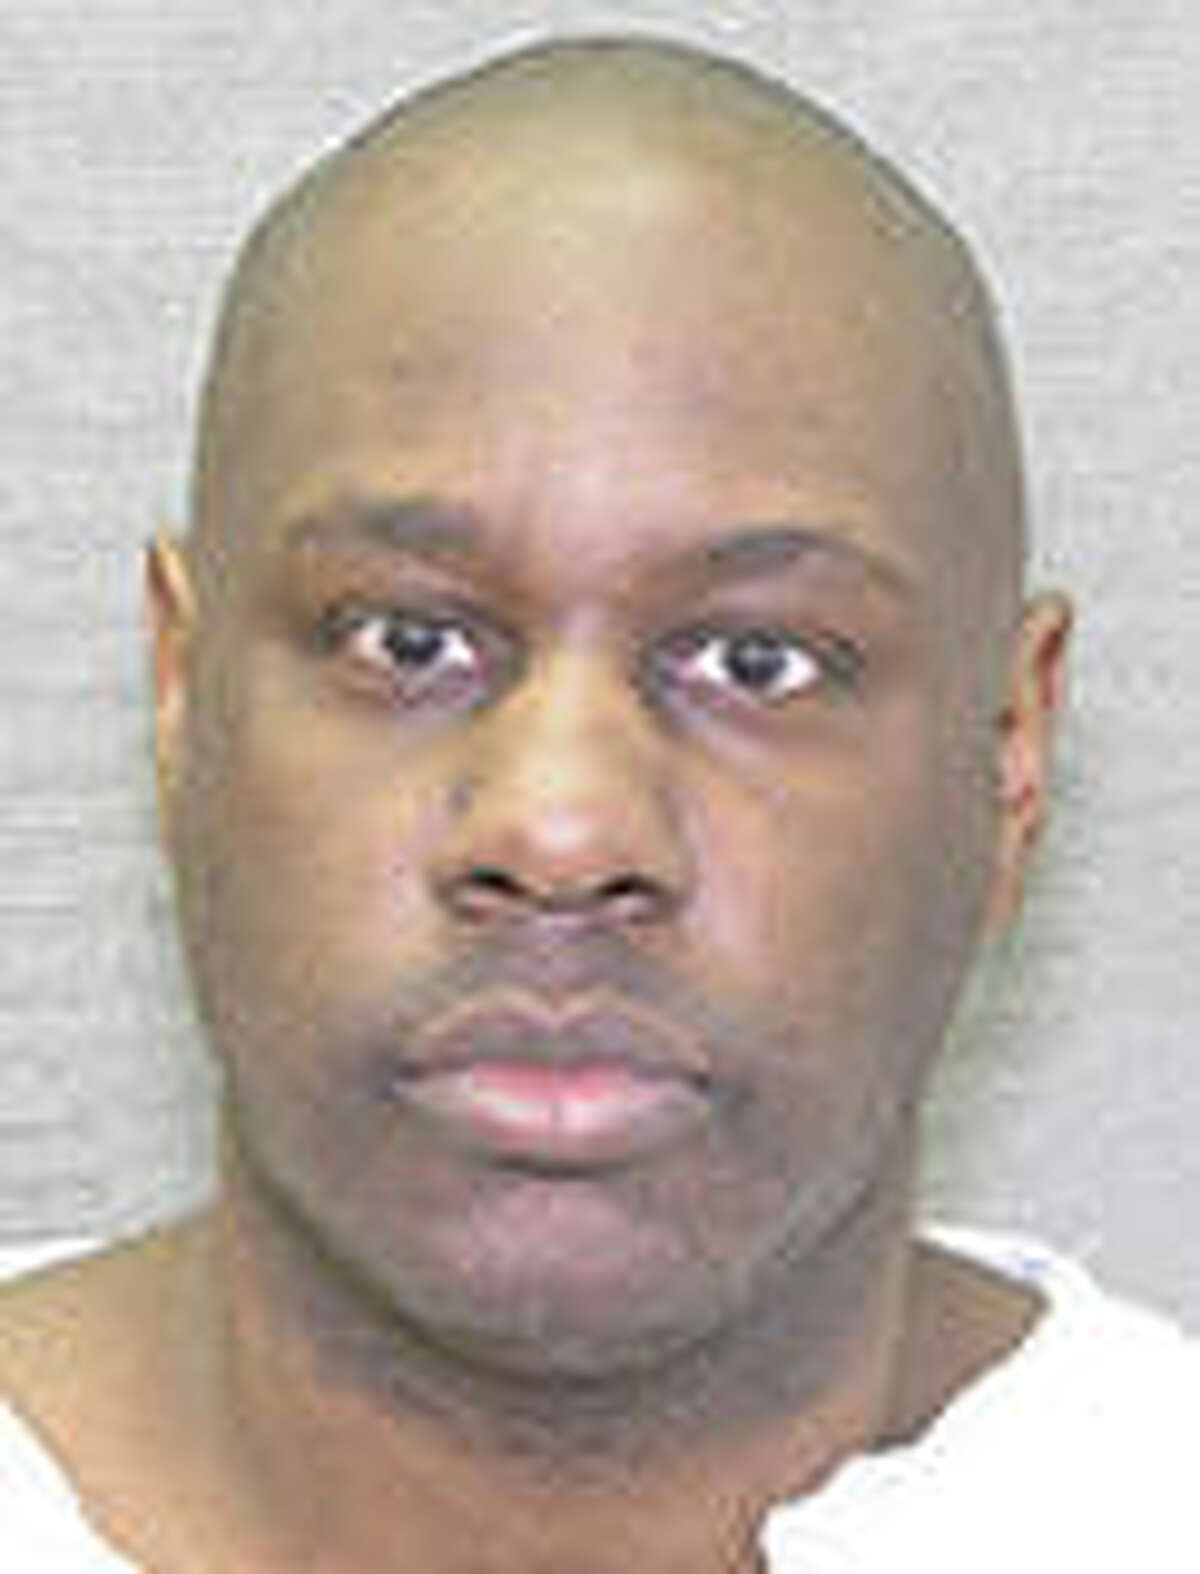 Tarrant County death row inmate who hallucinates demons granted stay of